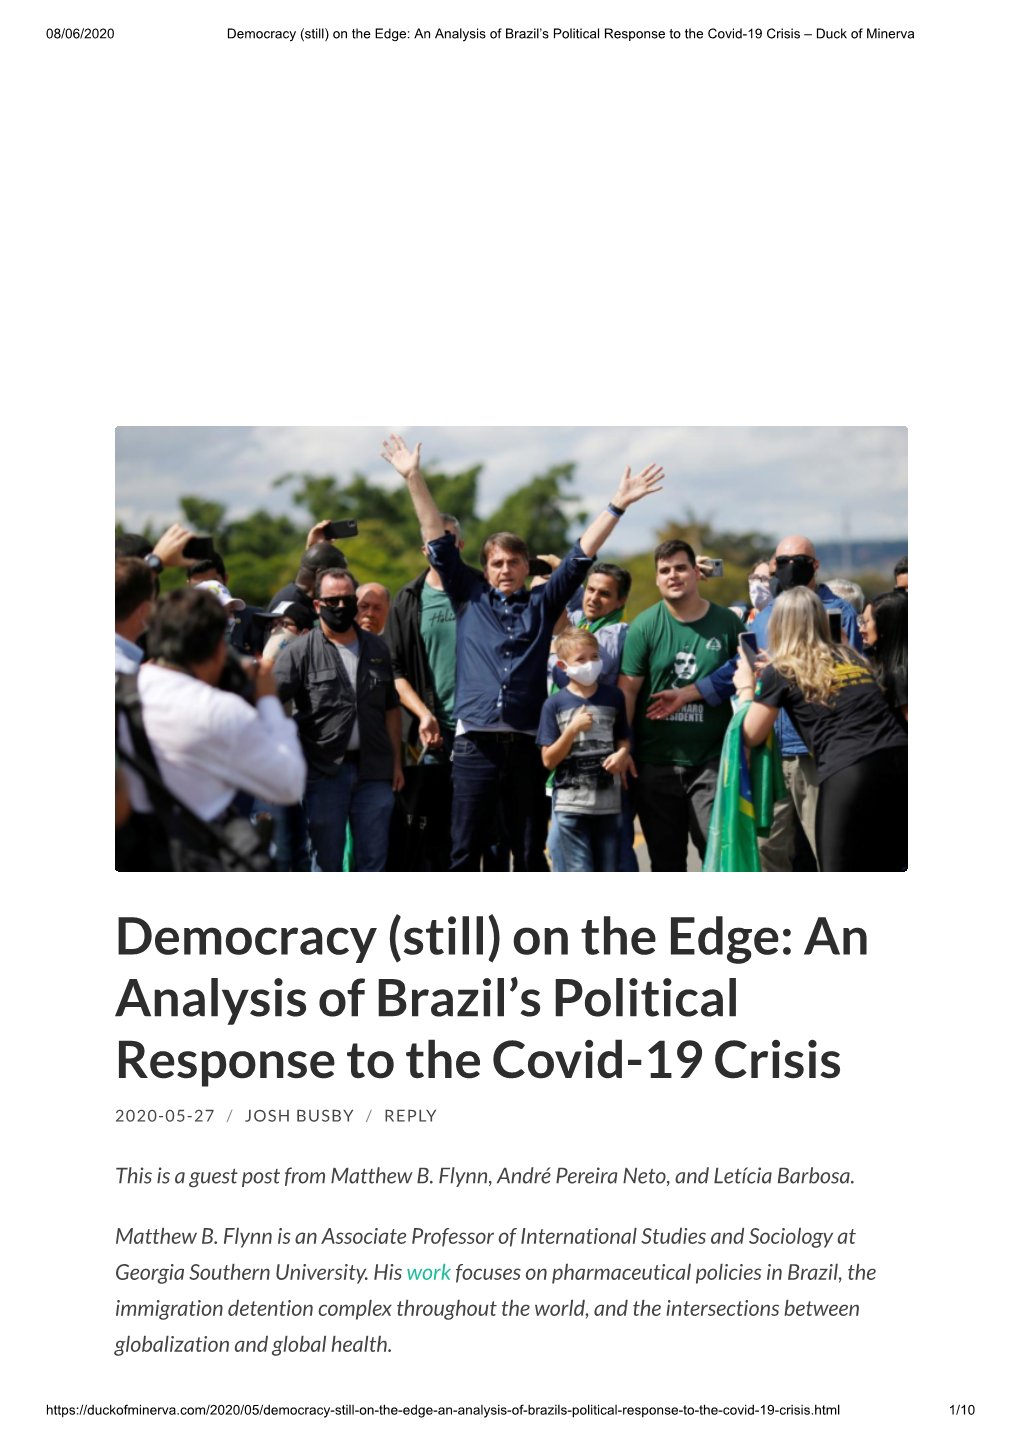 An Analysis of Brazil's Political Response to the Covid-19 Crisis